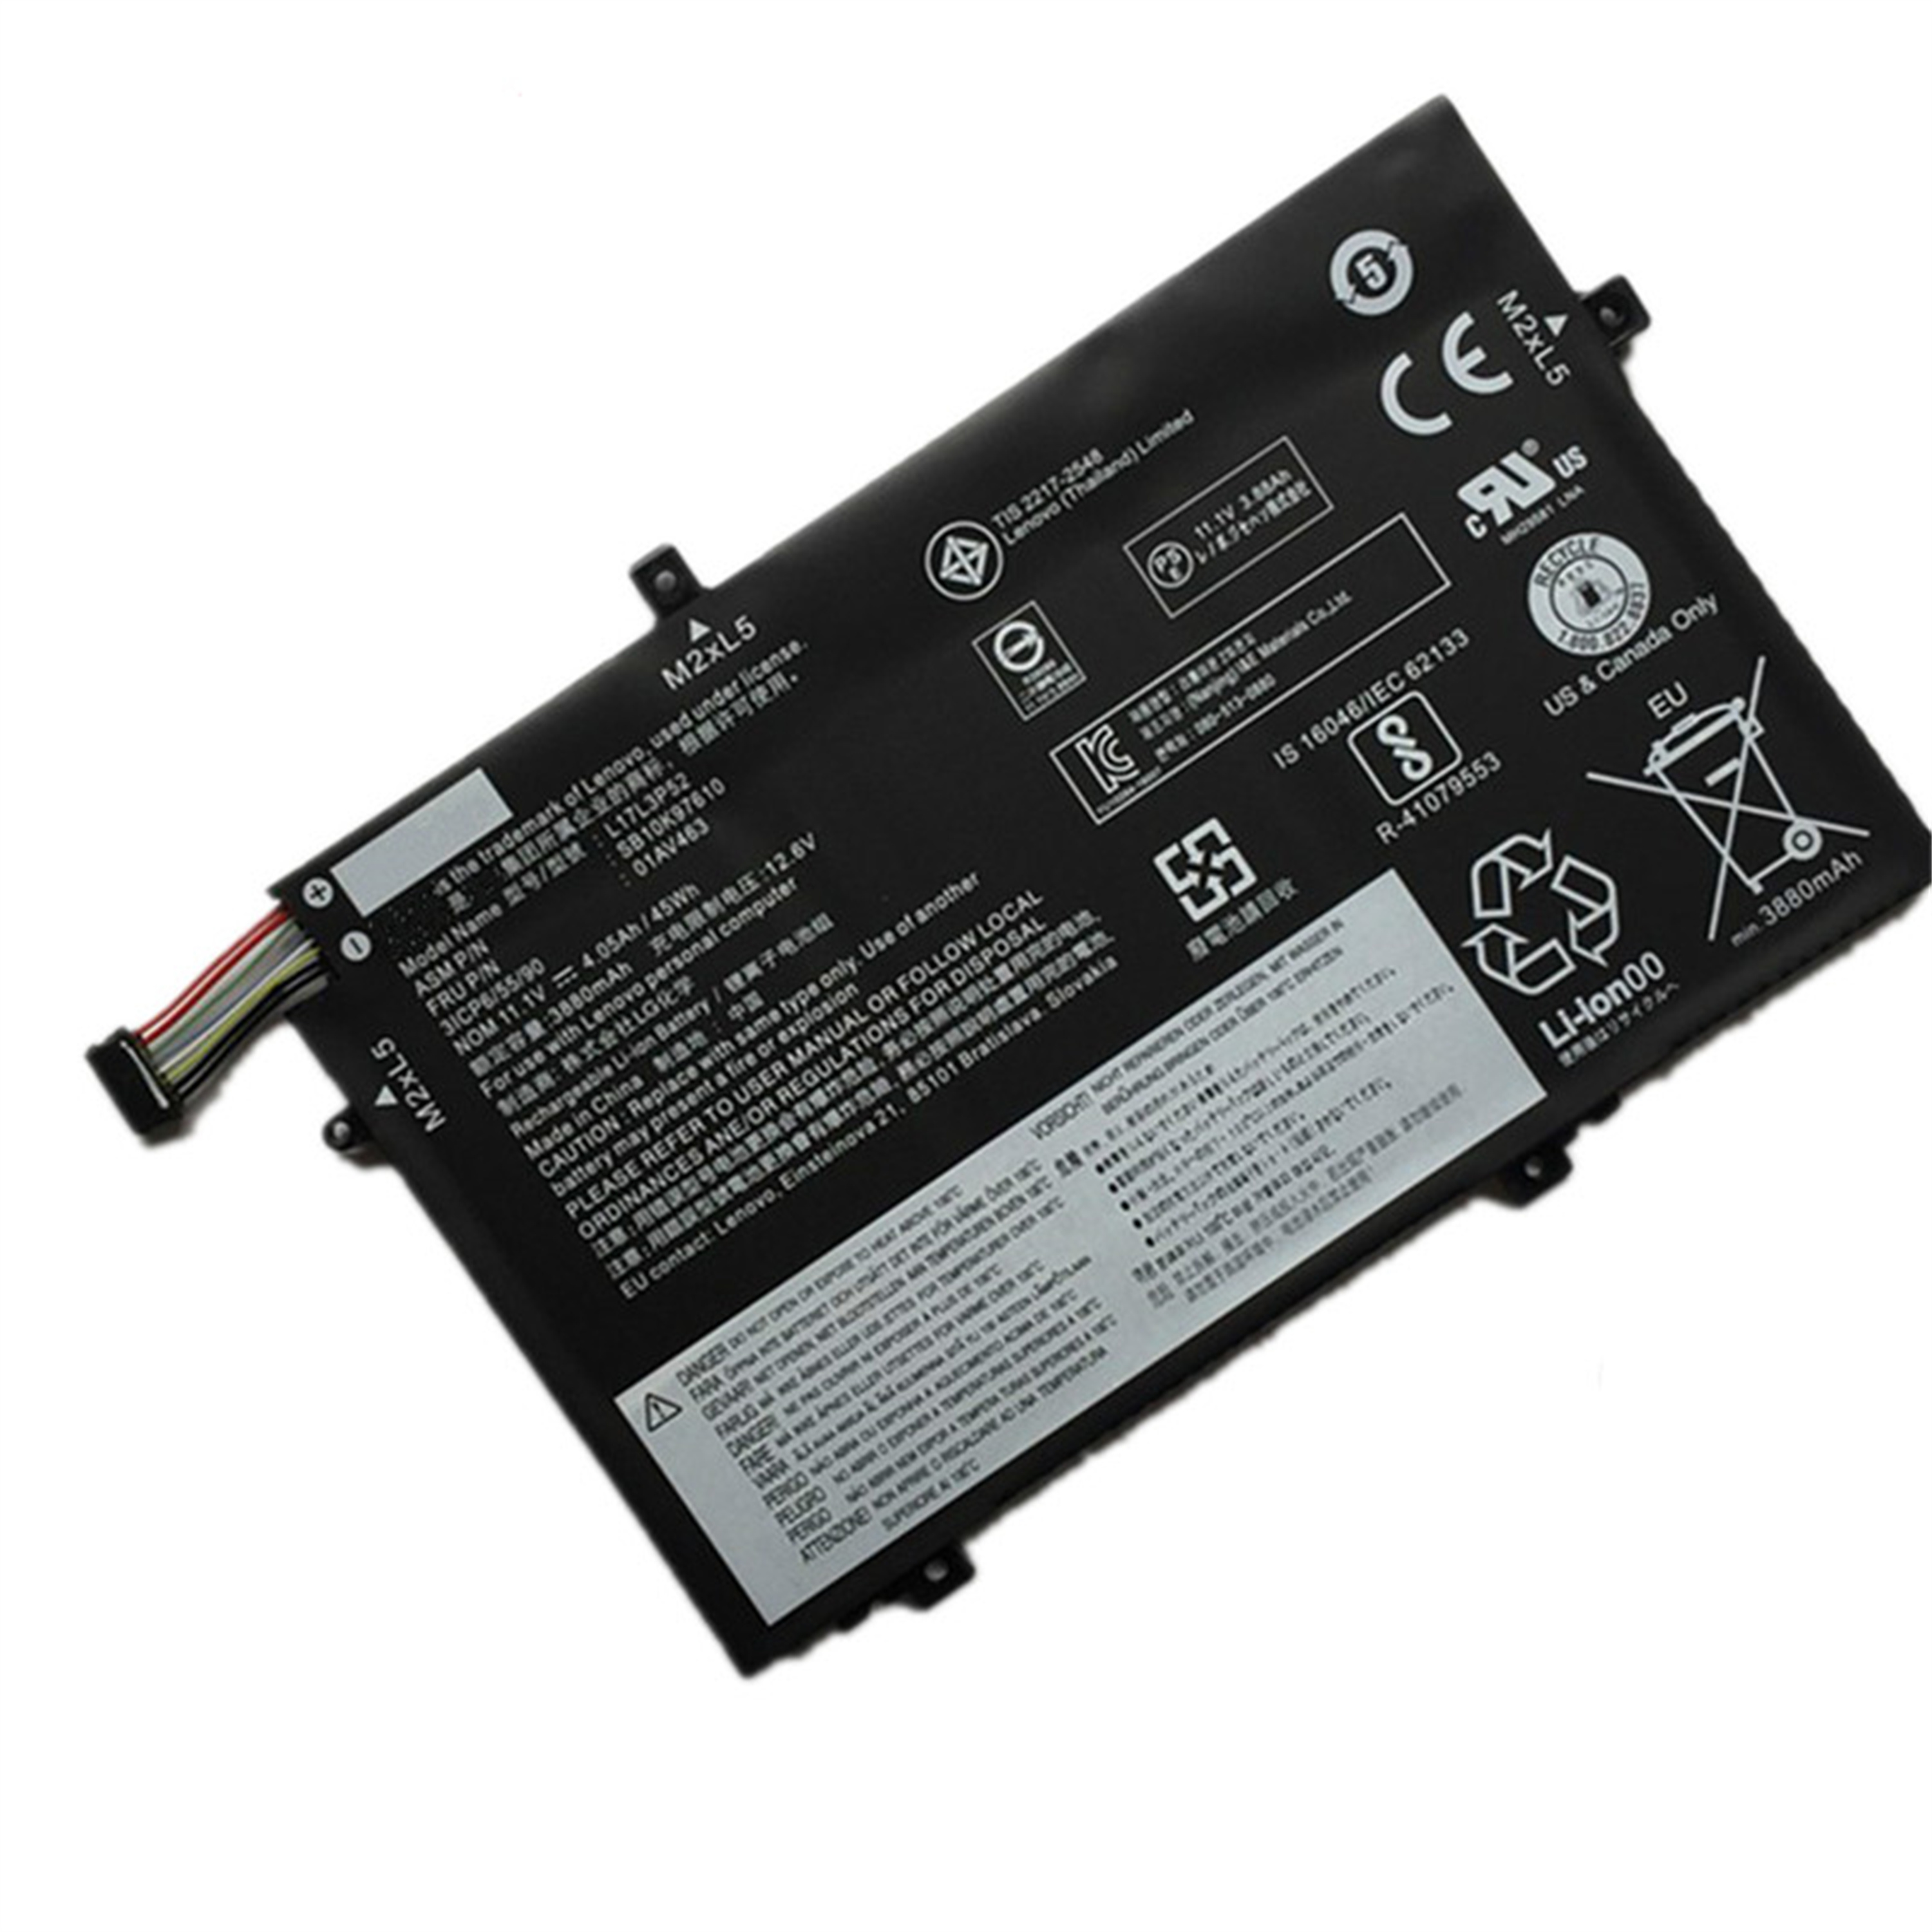 L17L3P52 rechargeable lithium ion Notebook battery Laptop battery For LenovoThinkPad L580 L590 L480 L490 Series Notebook 11.1V 45Wh 4120mAh